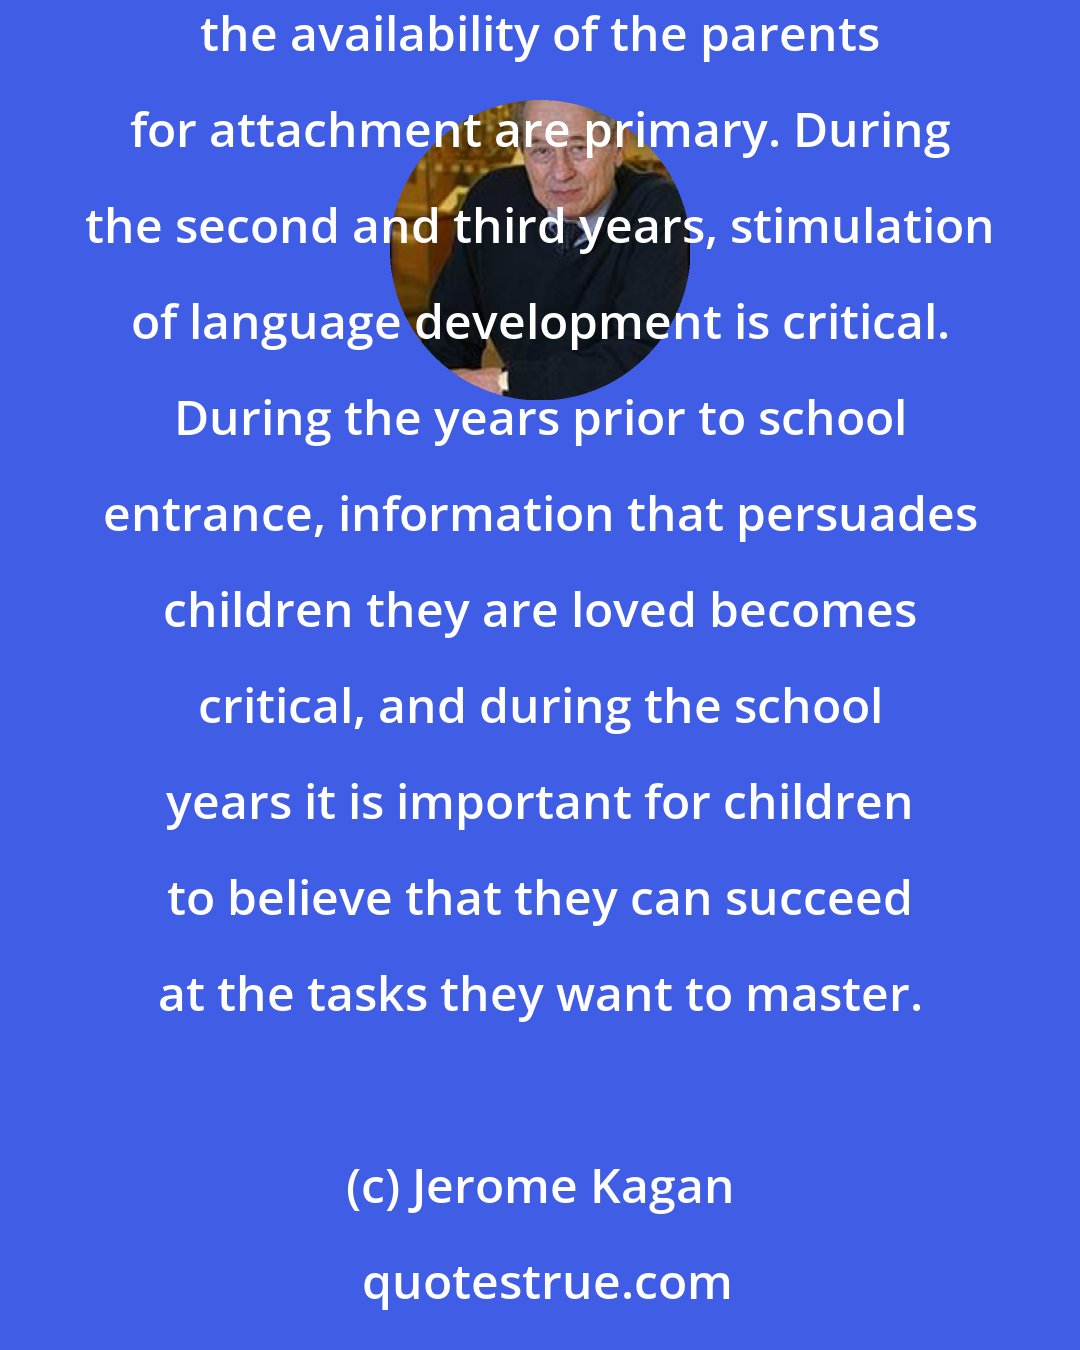 Jerome Kagan: At each stage of development the child needs different resources from the family. During the first year, a variety of experience and the availability of the parents for attachment are primary. During the second and third years, stimulation of language development is critical. During the years prior to school entrance, information that persuades children they are loved becomes critical, and during the school years it is important for children to believe that they can succeed at the tasks they want to master.